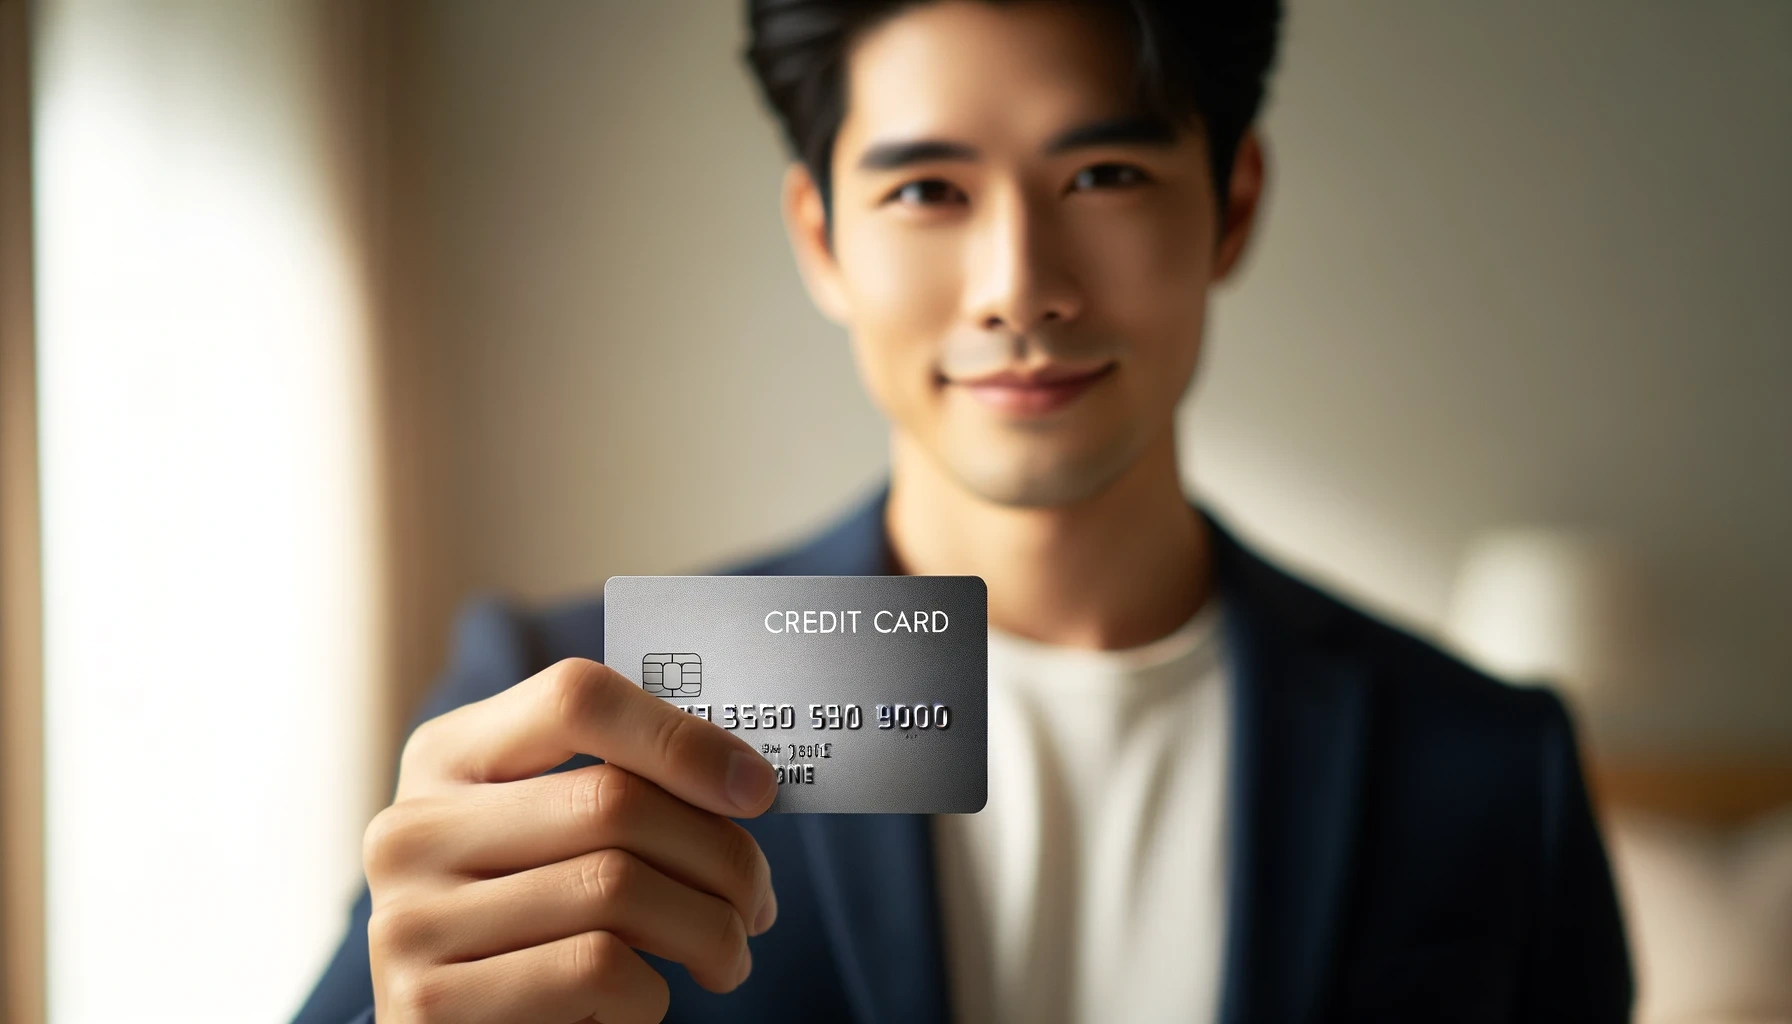 Citi Simplicity Credit Card: Your Online Application Guide